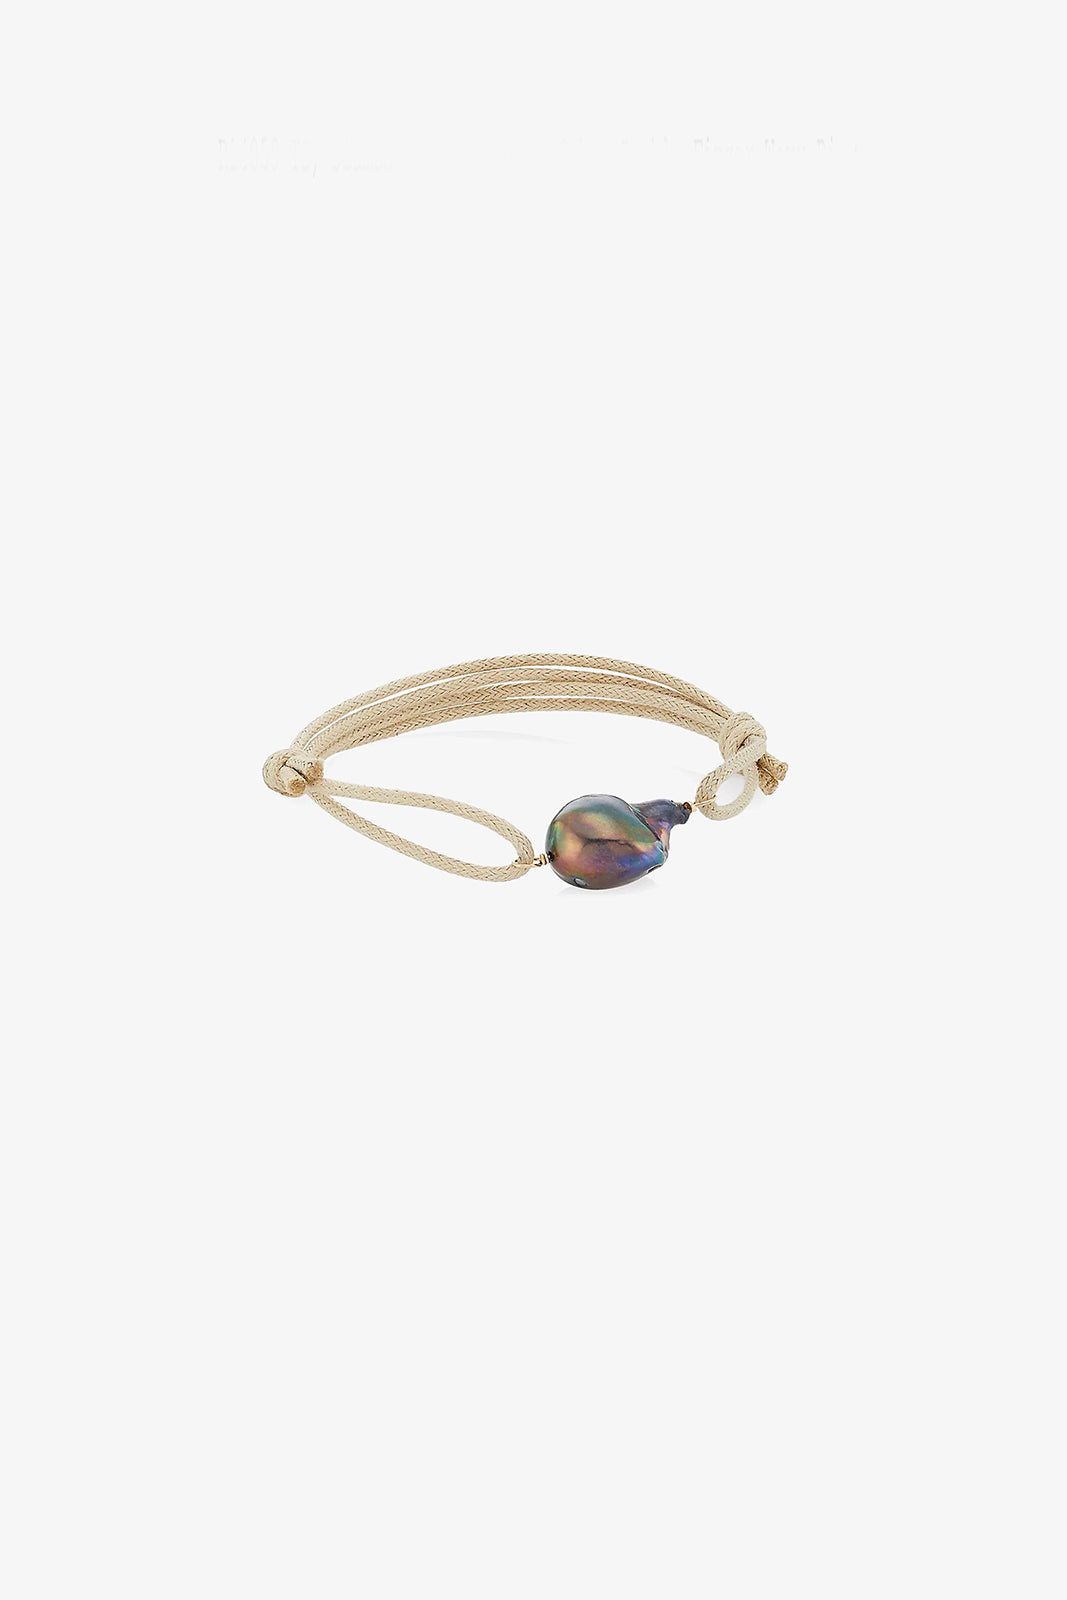 LUCA CORD BRACELET IN NATURAL WITH BLUE PEARL